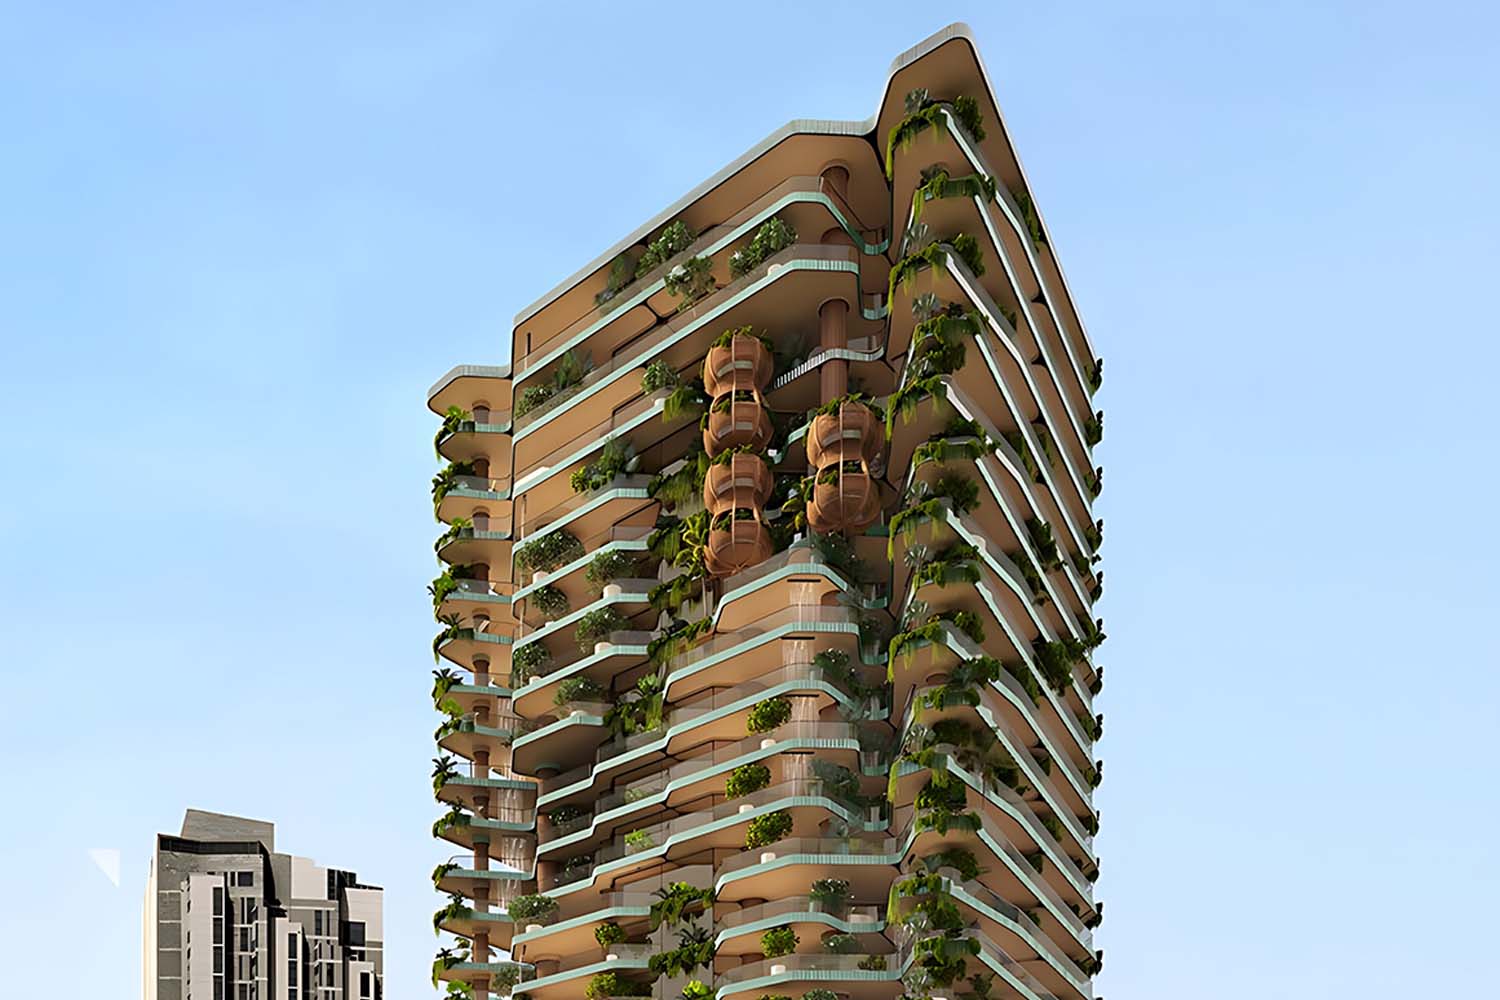 The-prices-for-Eywa-a-new-luxury-residence-in-Dubai-have-been-revealed